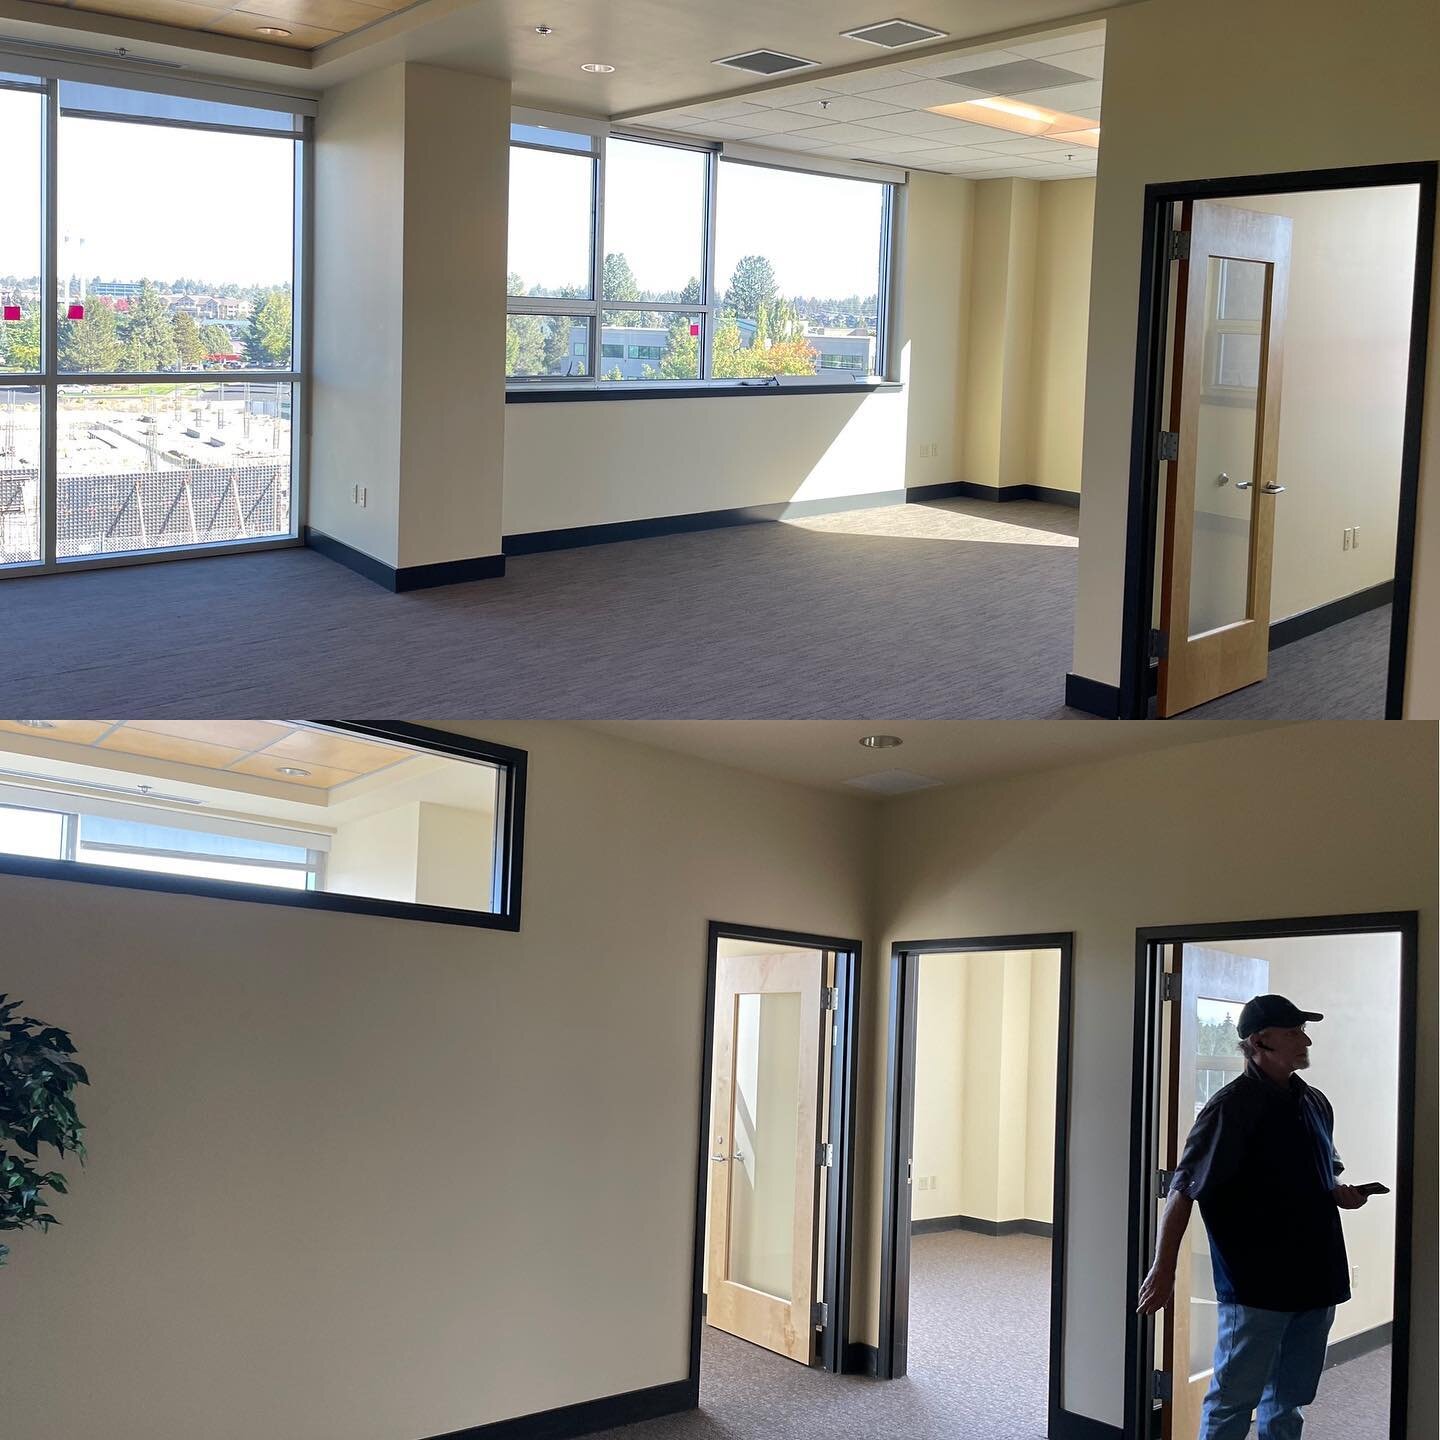 Need to open up your #commercialoffice space so you can stretch your legs? #commercialtenantimprovement are our specialty and we&rsquo;d love to help!

#bend #bendoregon #redmondoregon #sistersoregon #prinevilleoregon #powellbutteoregon #pnw  #centra